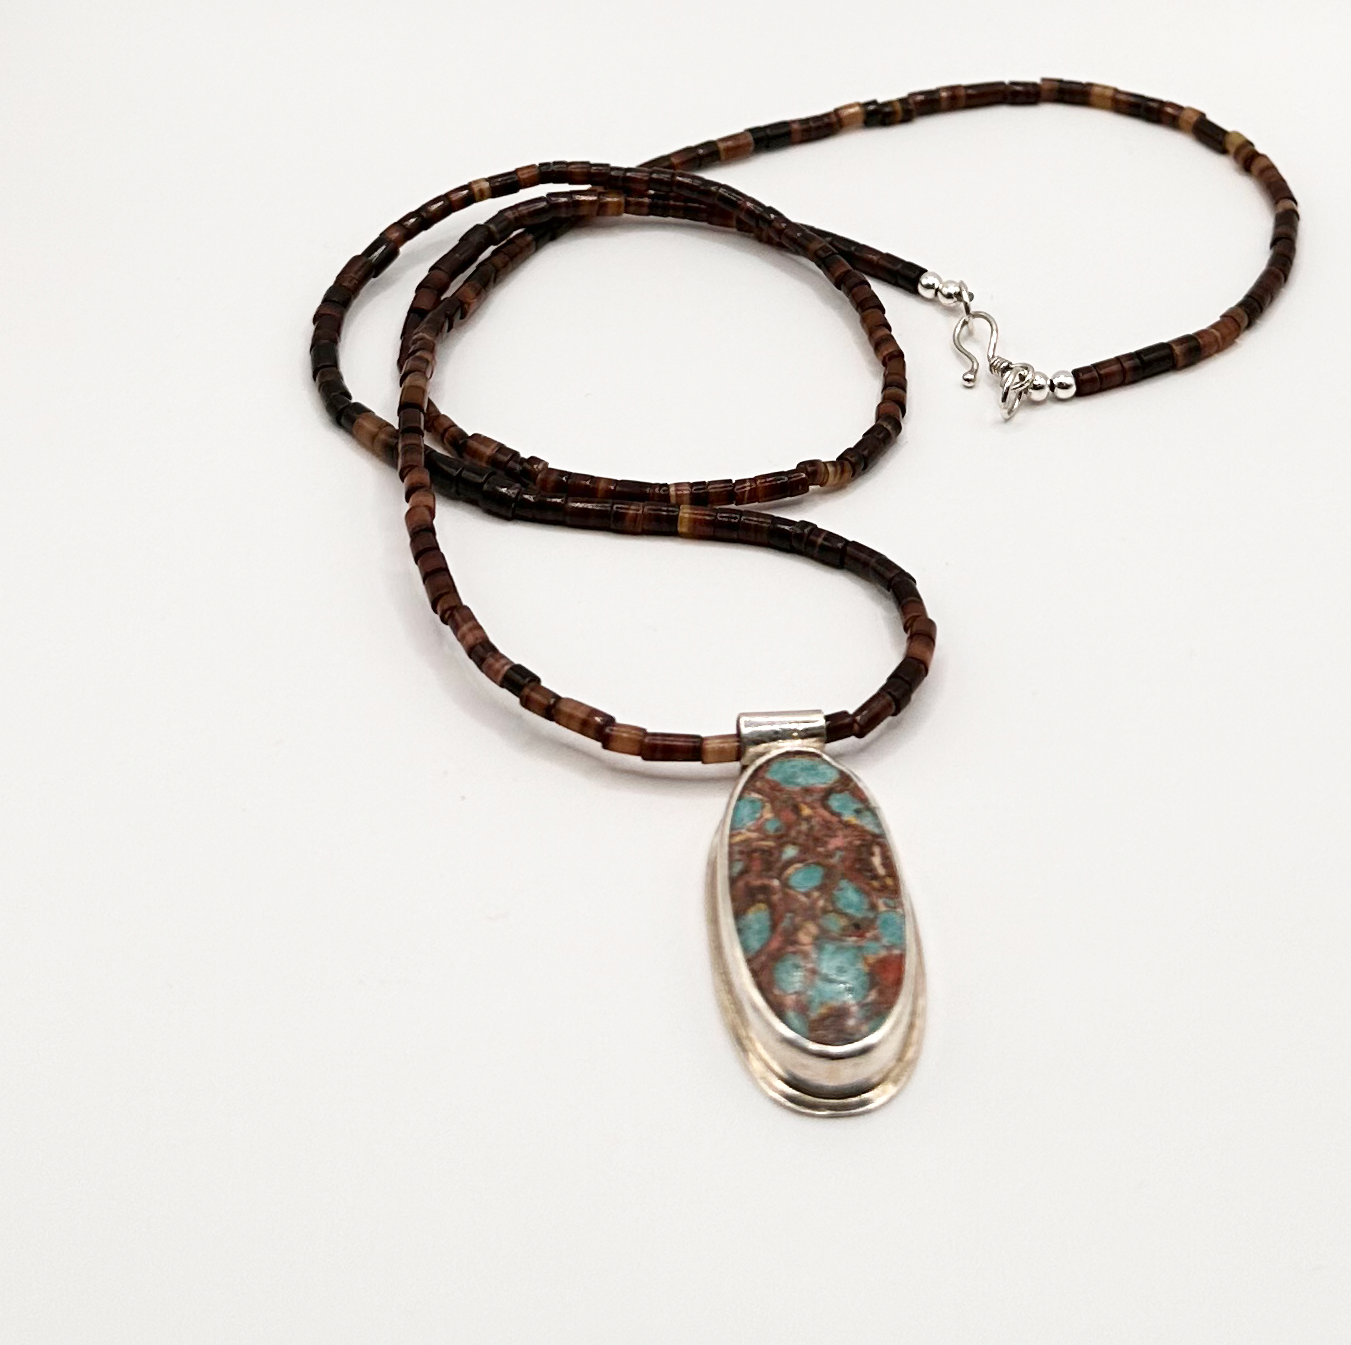 Heishe Shell Beaded Chain with an Accent Sediment Jasper Pendant Set in Sterling Silver